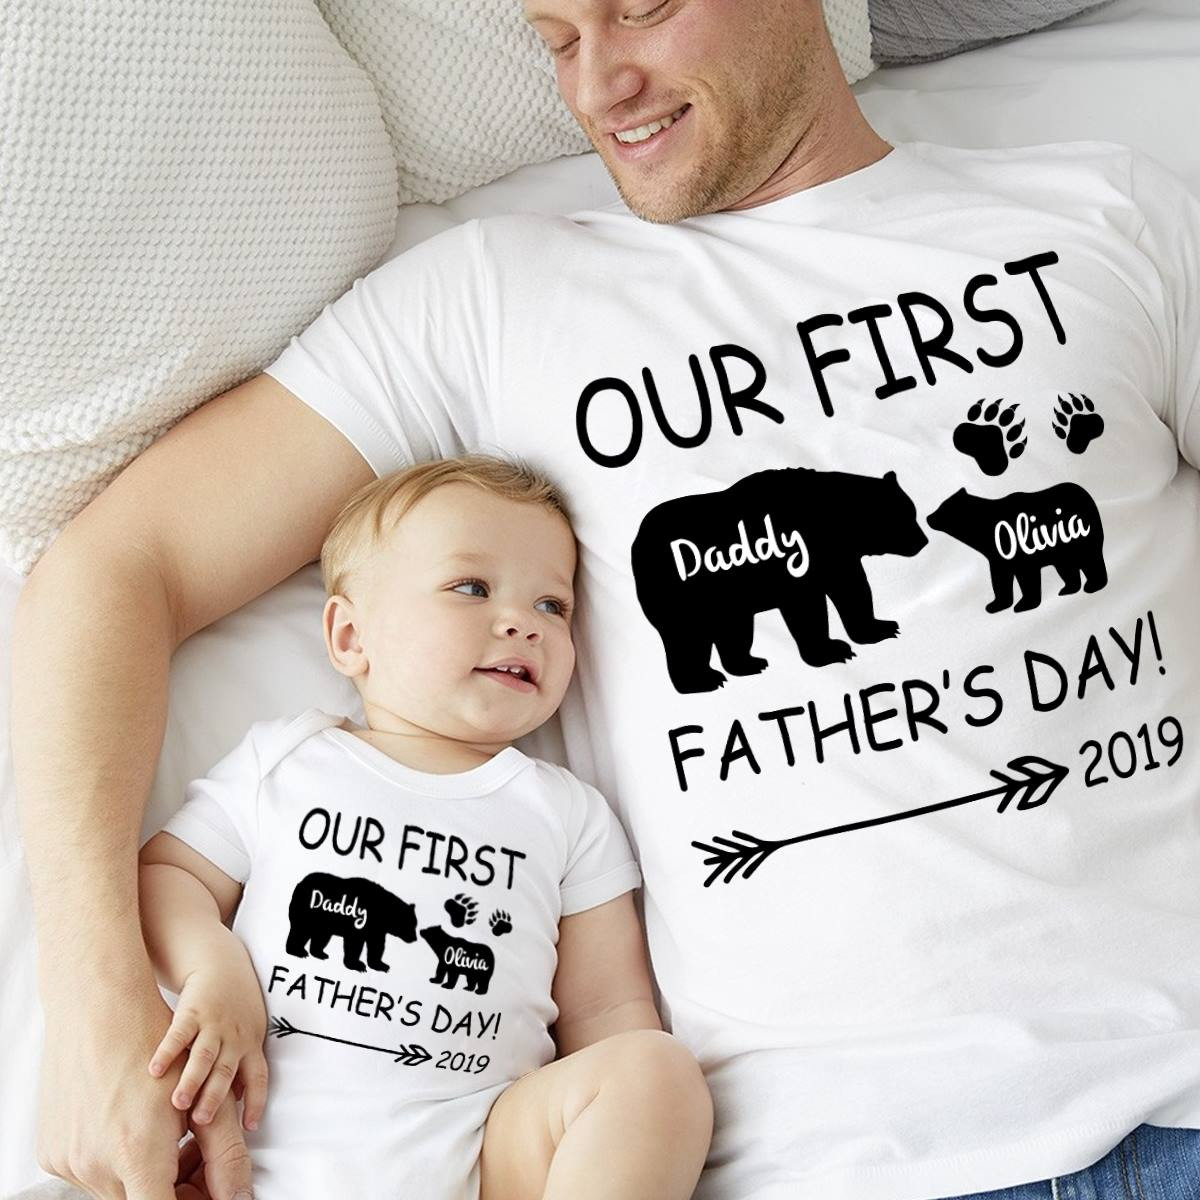 Baby Onesie, Funny Baby Onesies, Custom Baby Onesie, Our First Father's Day Baby Onesie